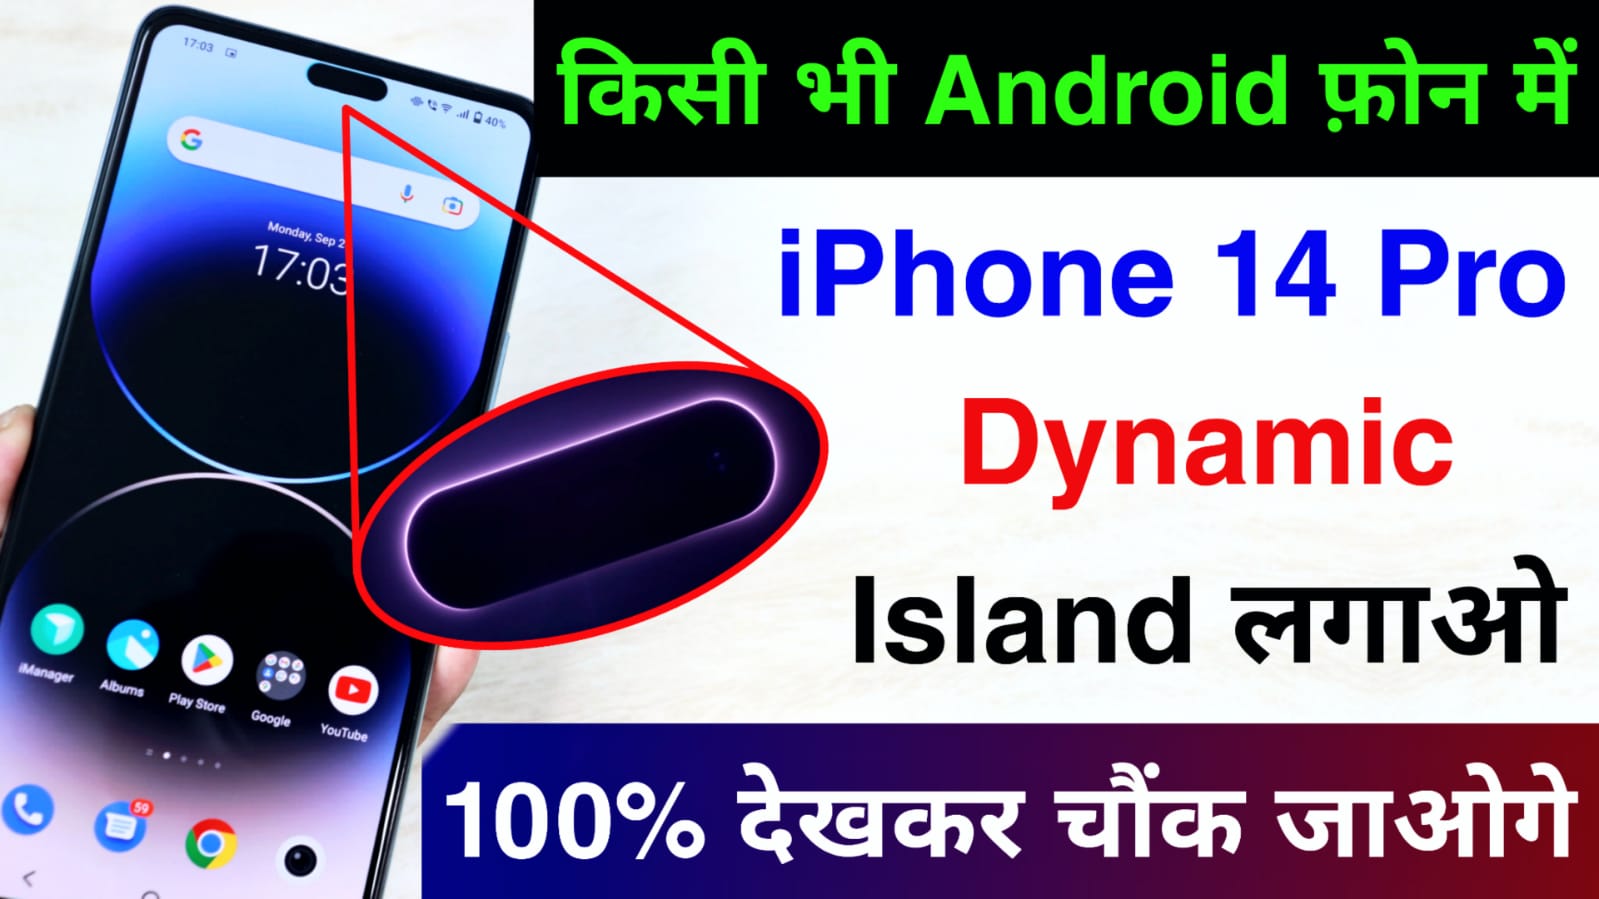 iPhone 14 Pro Dynamic Island in Android